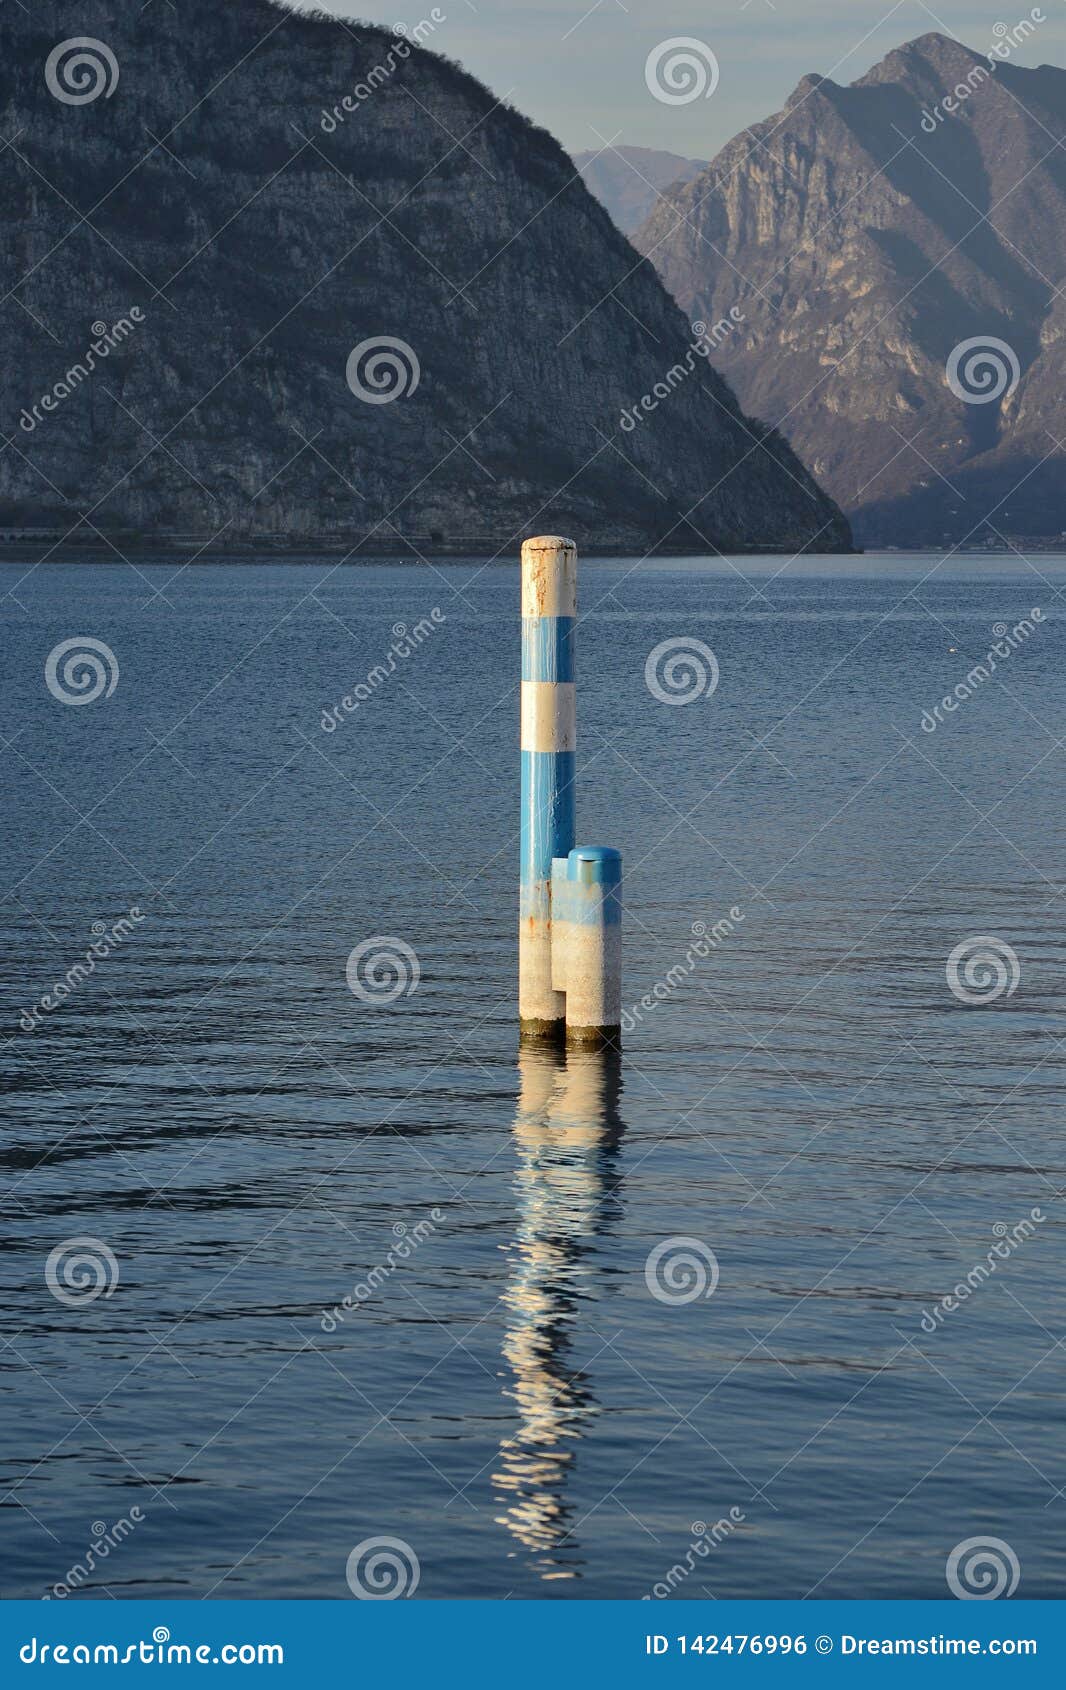 scenic view of iseo lake on a sunny winter day